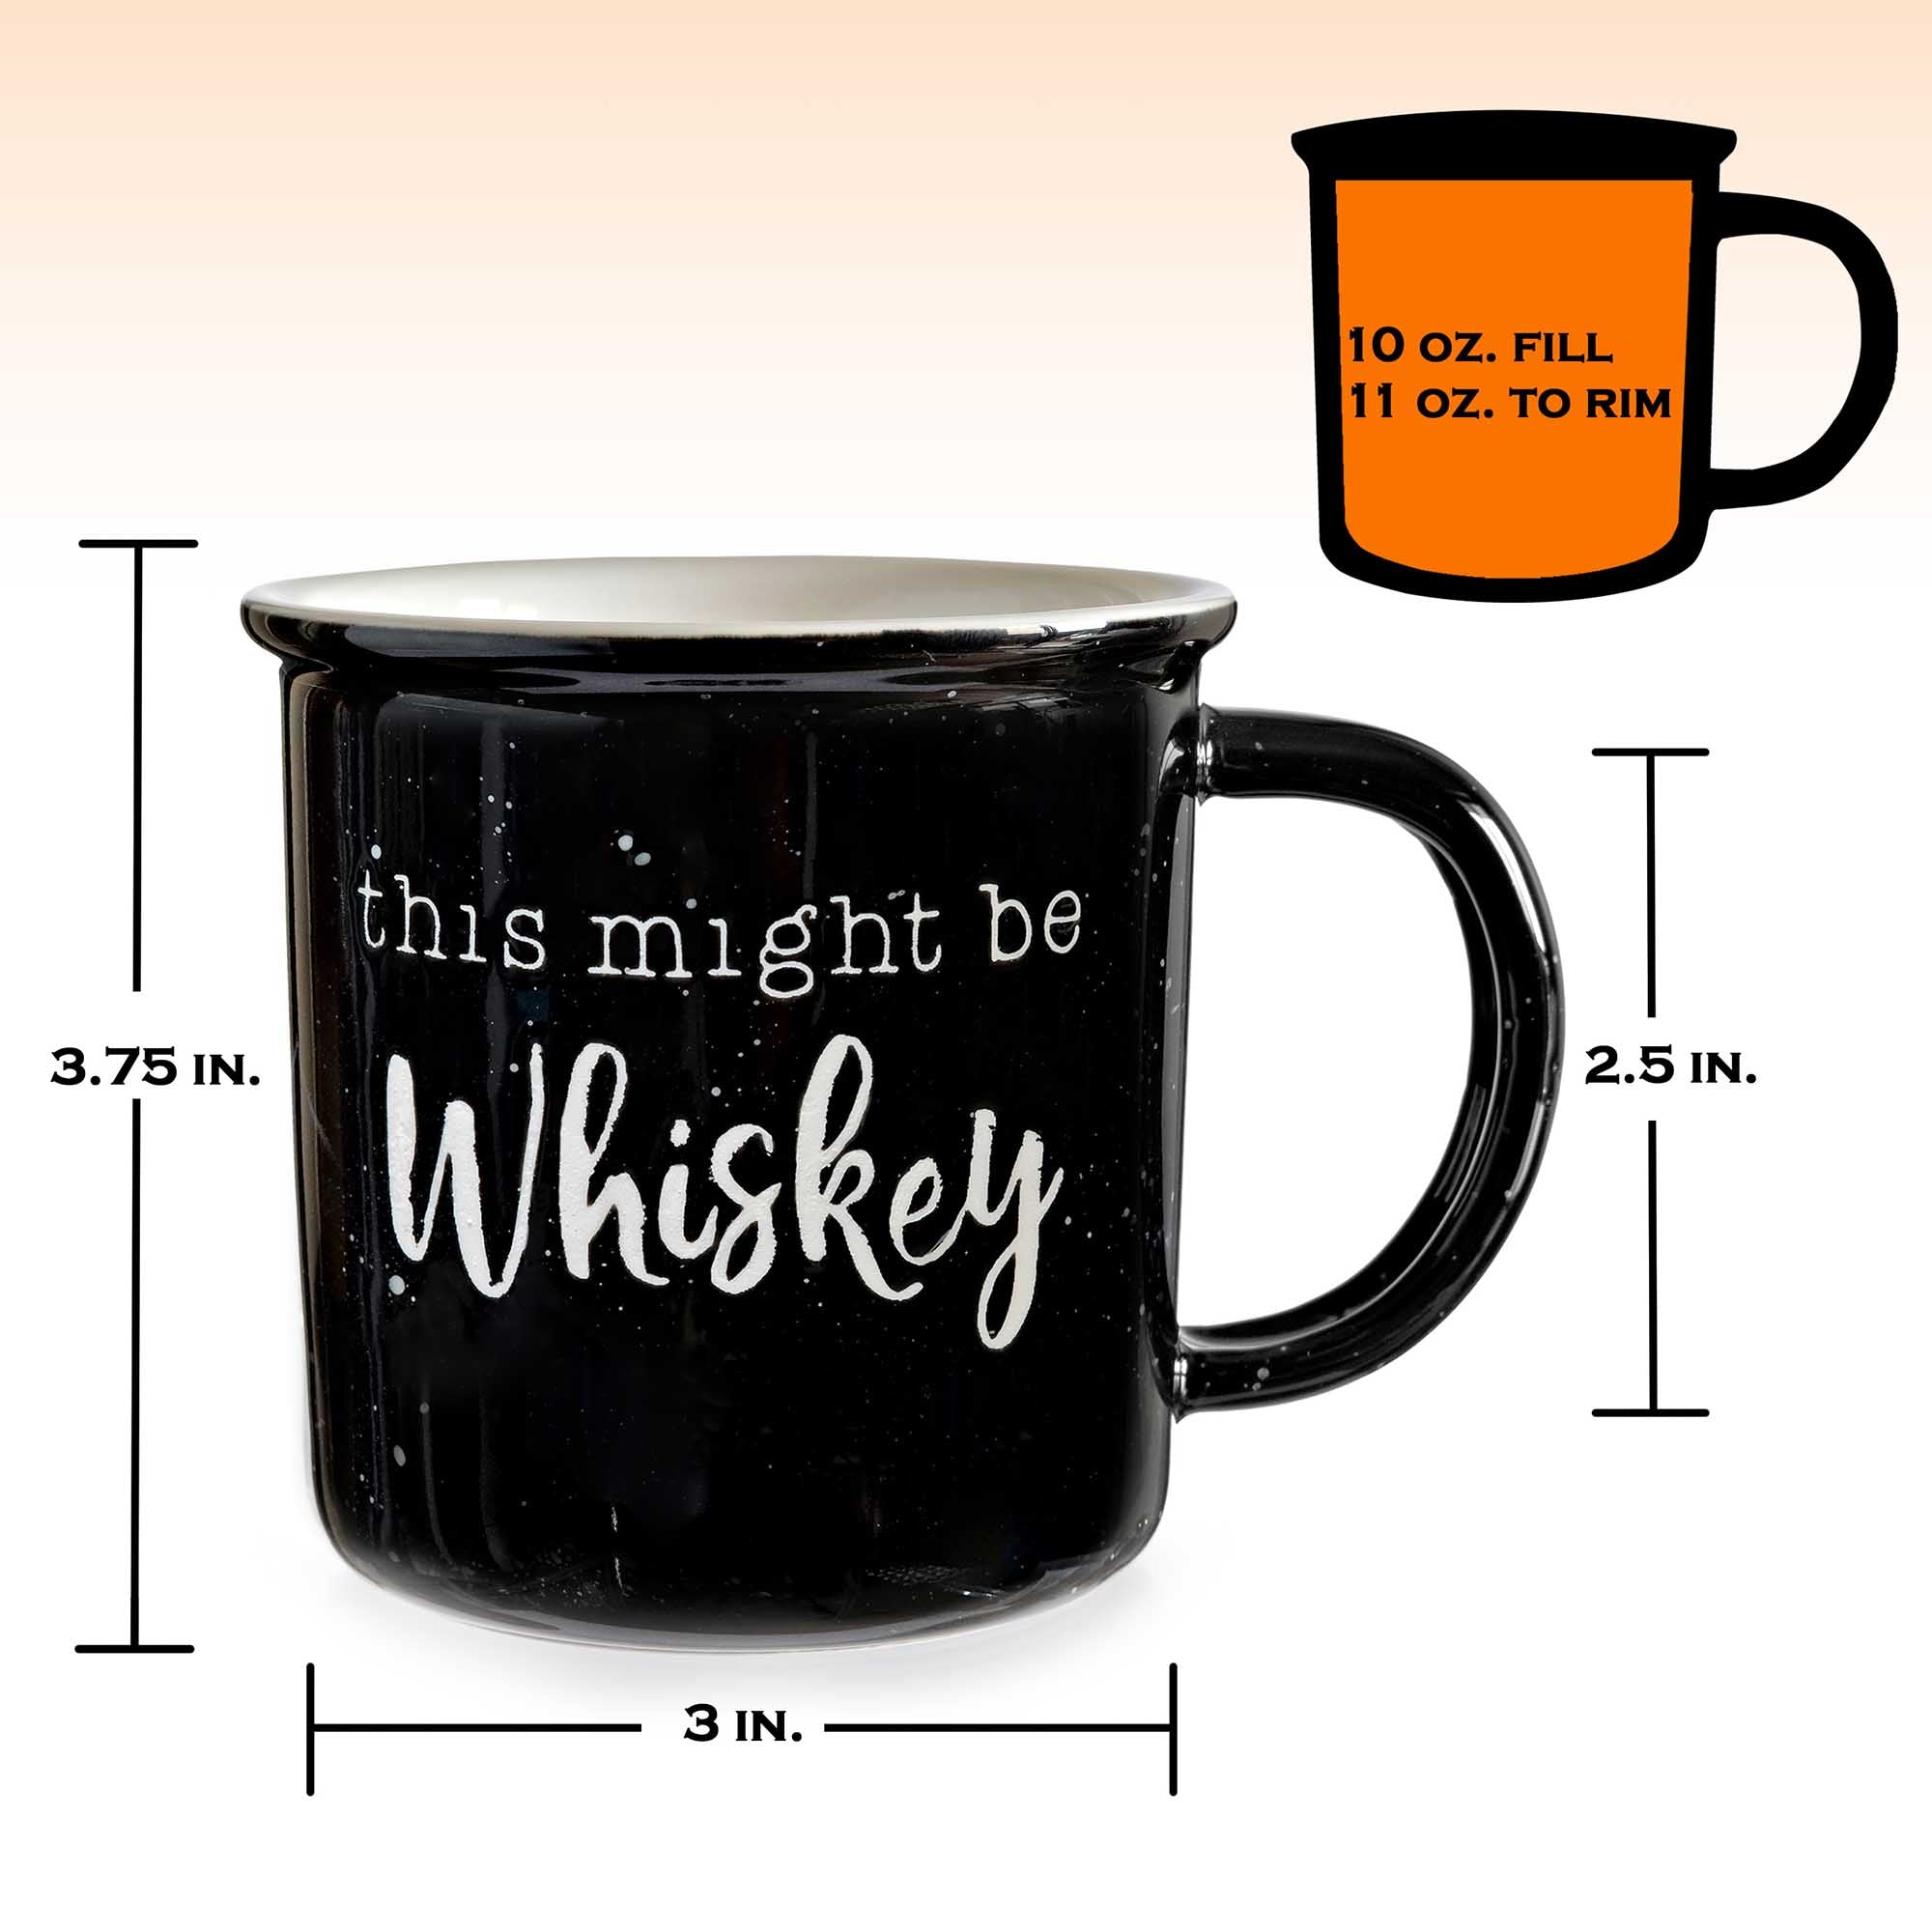  CHICKOR Might Be Coffee Its Probably Whiskey Mug